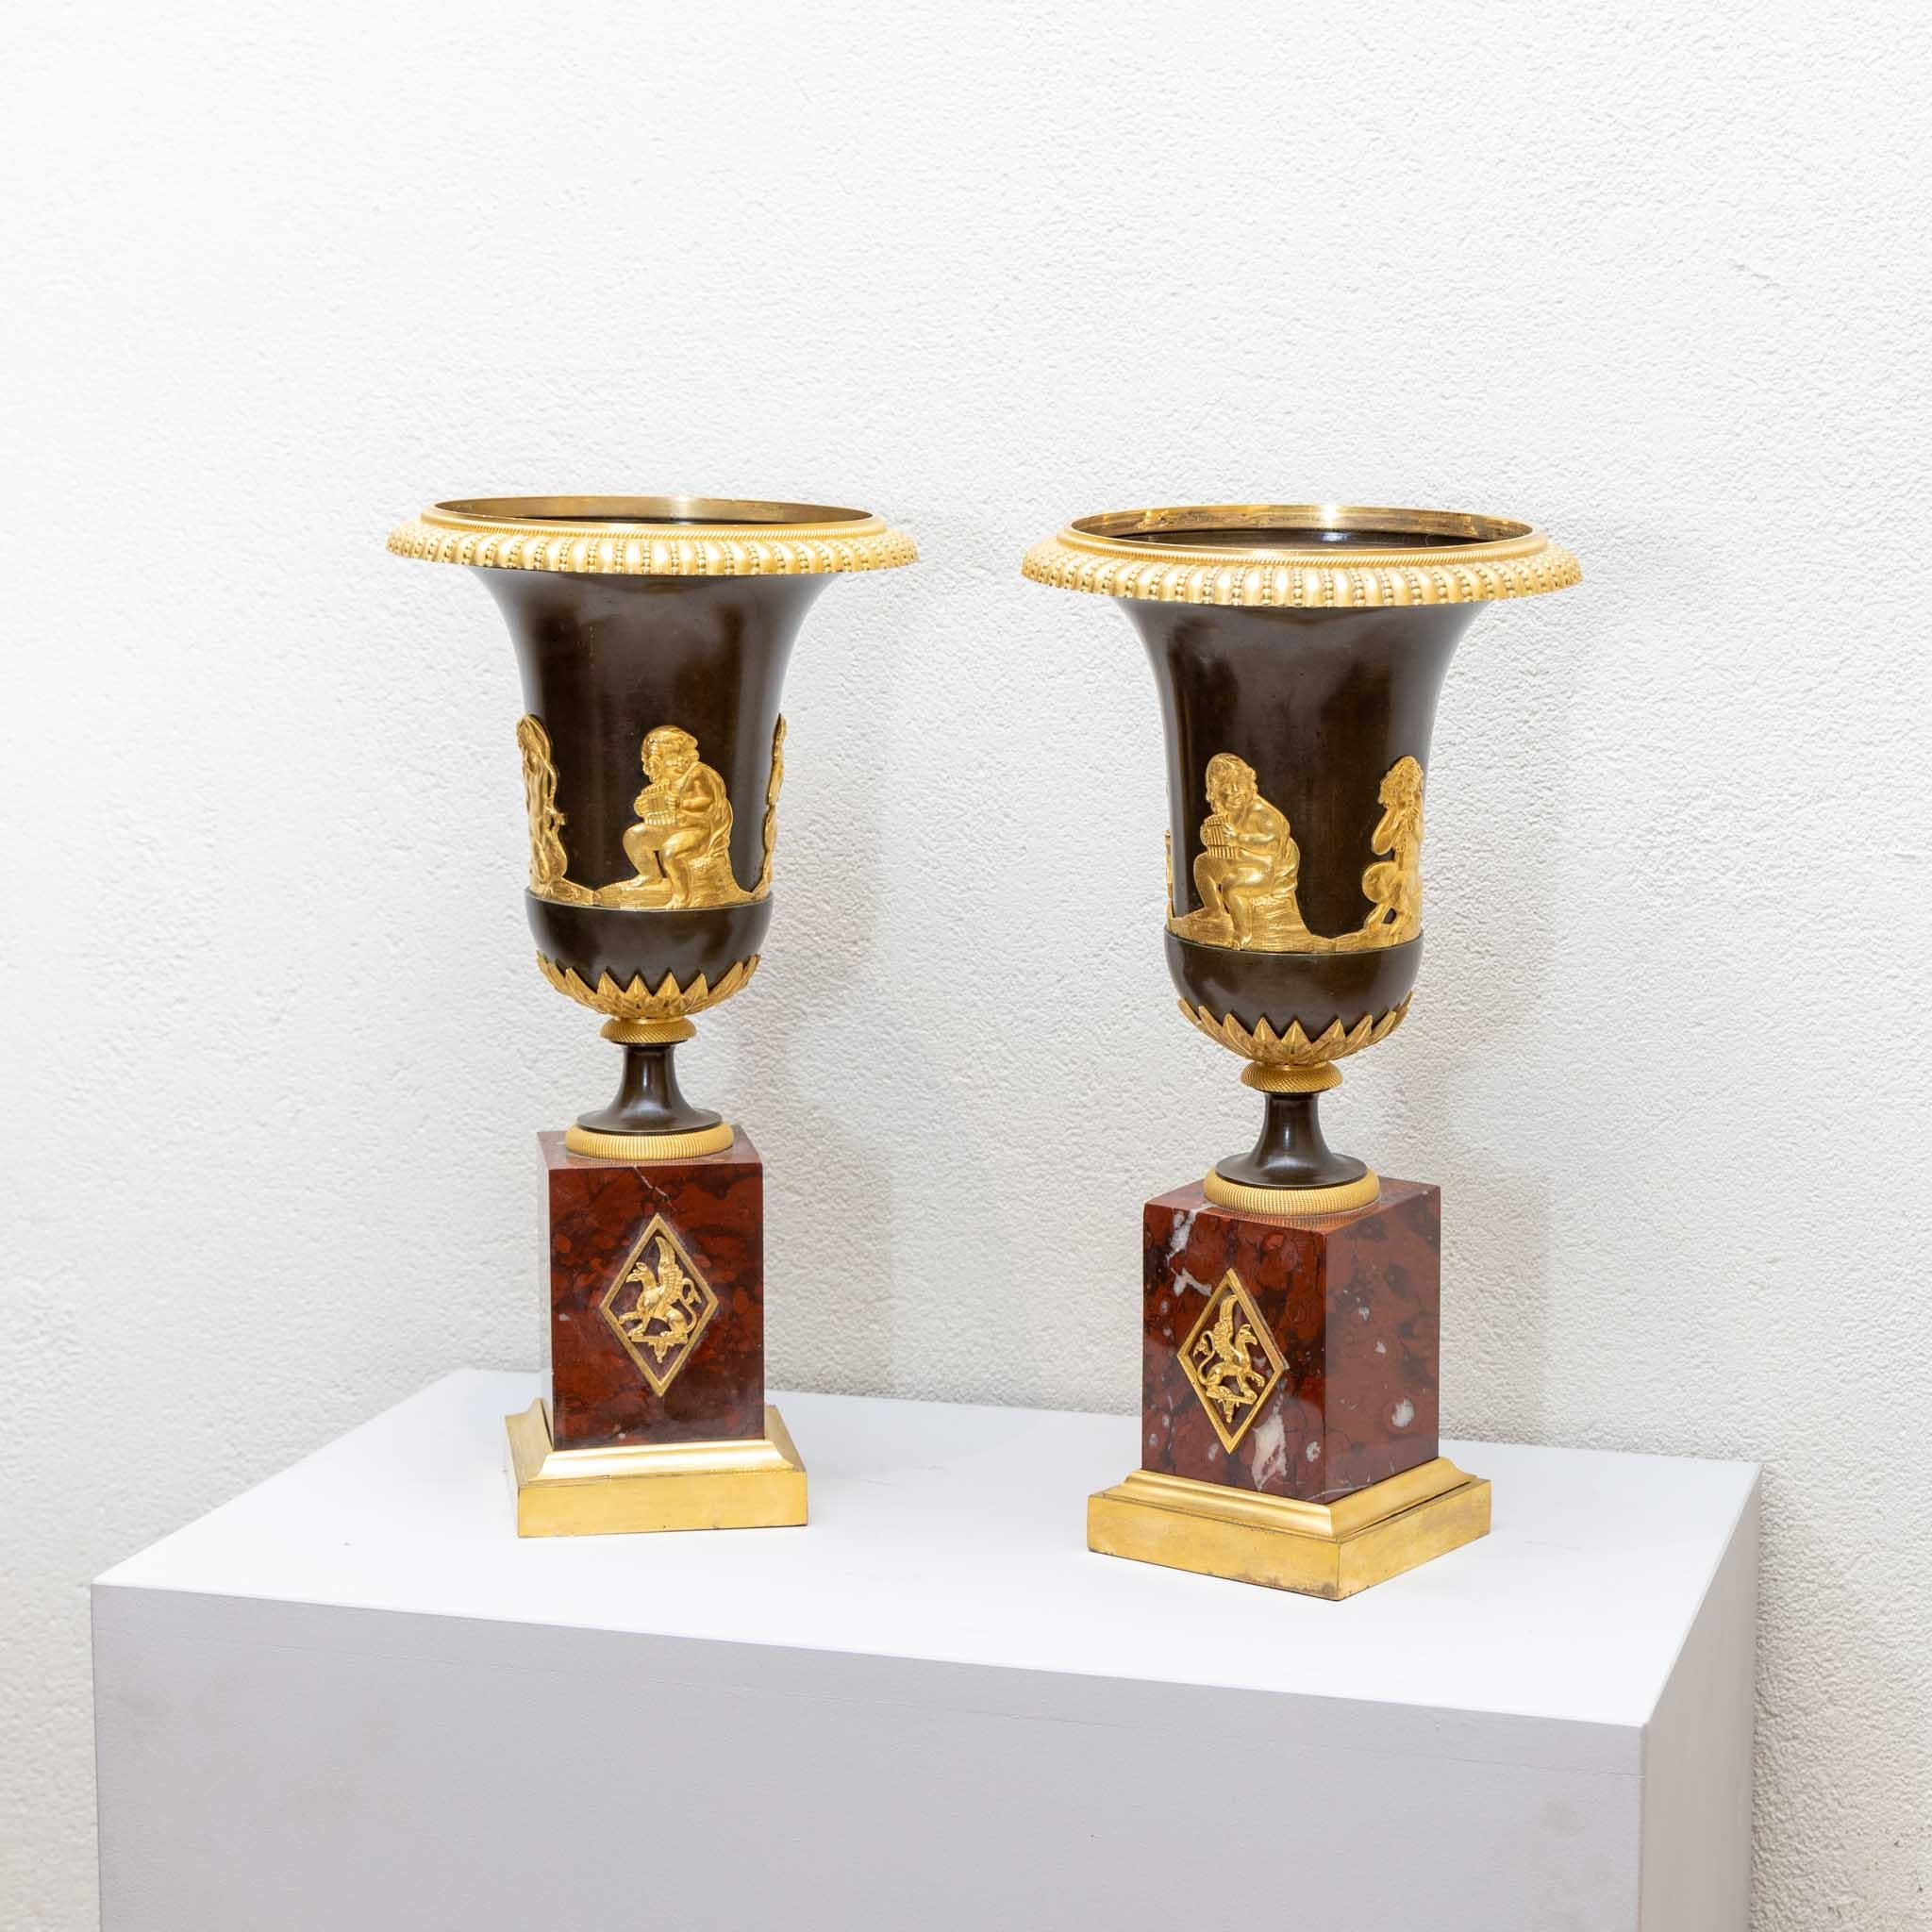 Pair of Empire vases on red marble plinths with fire-gilt bronze fittings in the shape of small satyrs and putti. (Measurements plinth: 10 x 10 cm).